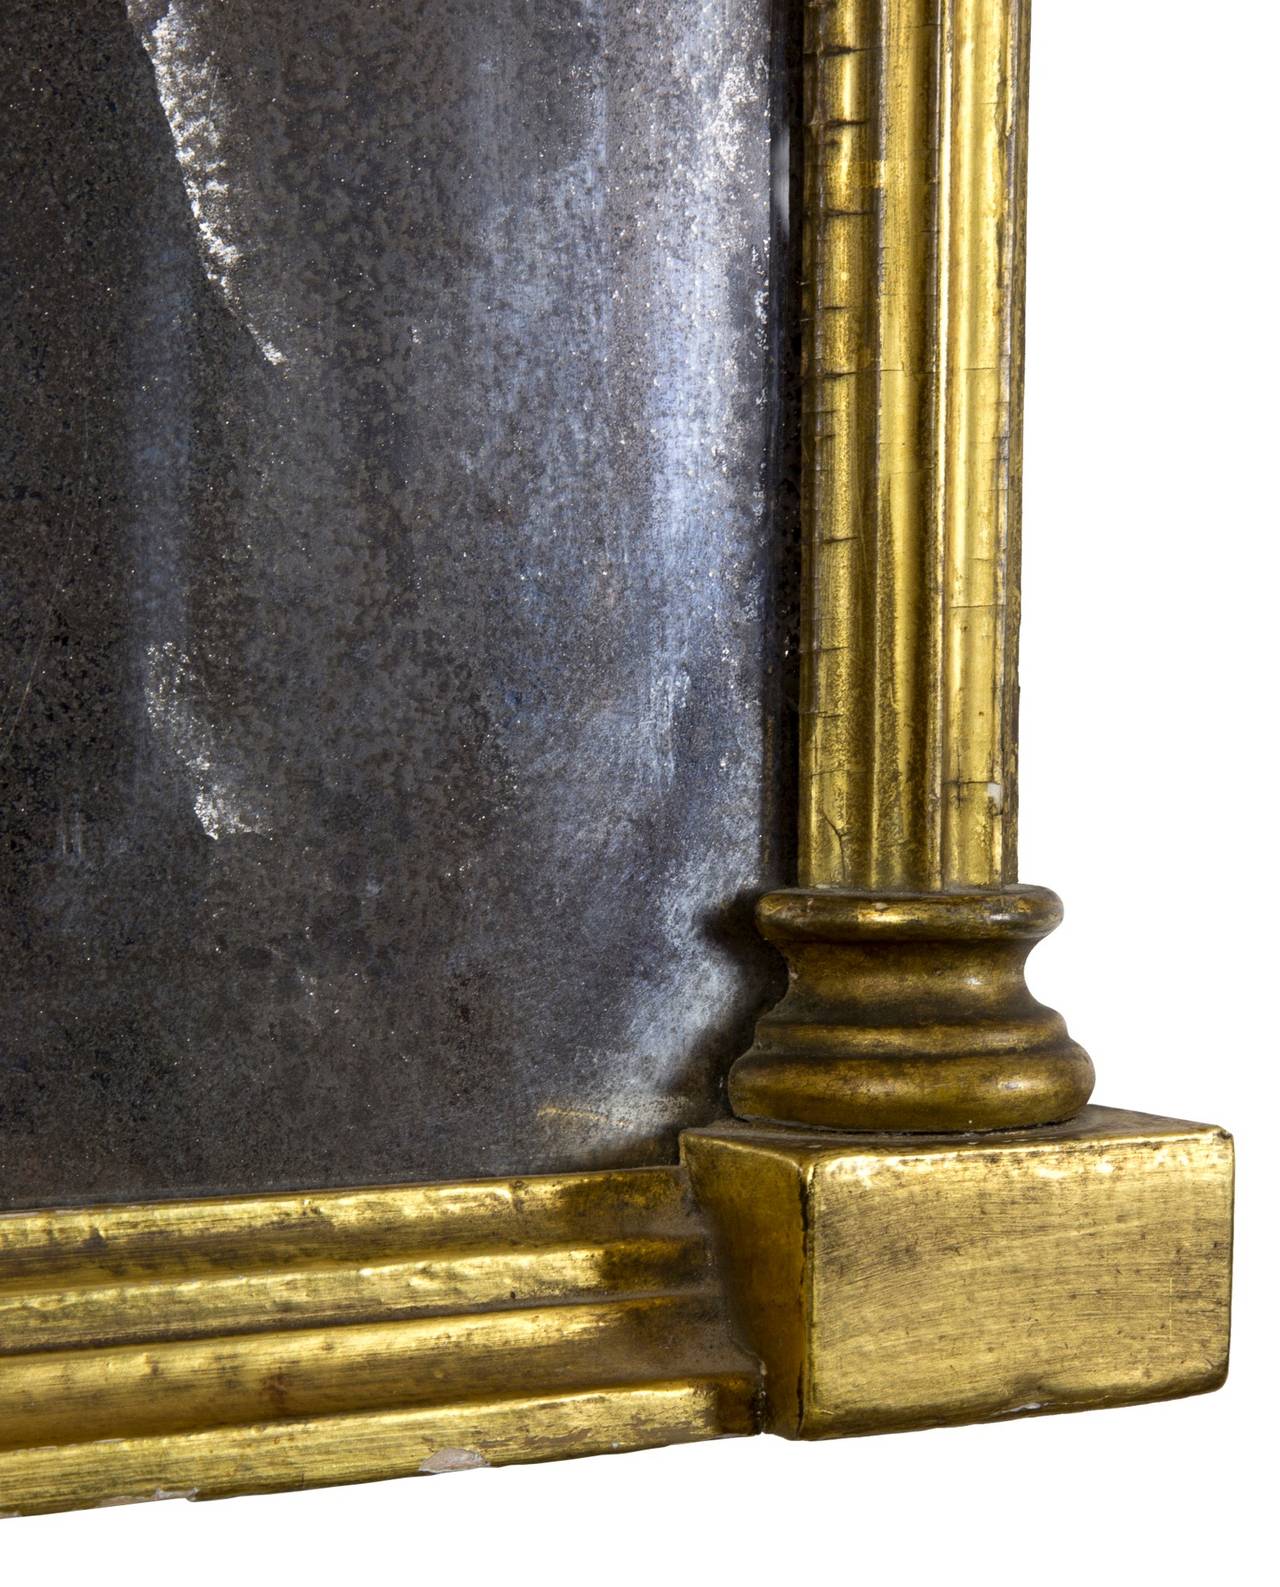 Early 19th Century Federal Gilt Tabernacle Mirror with Newburyport Reverse Painting, MA, circa 1800